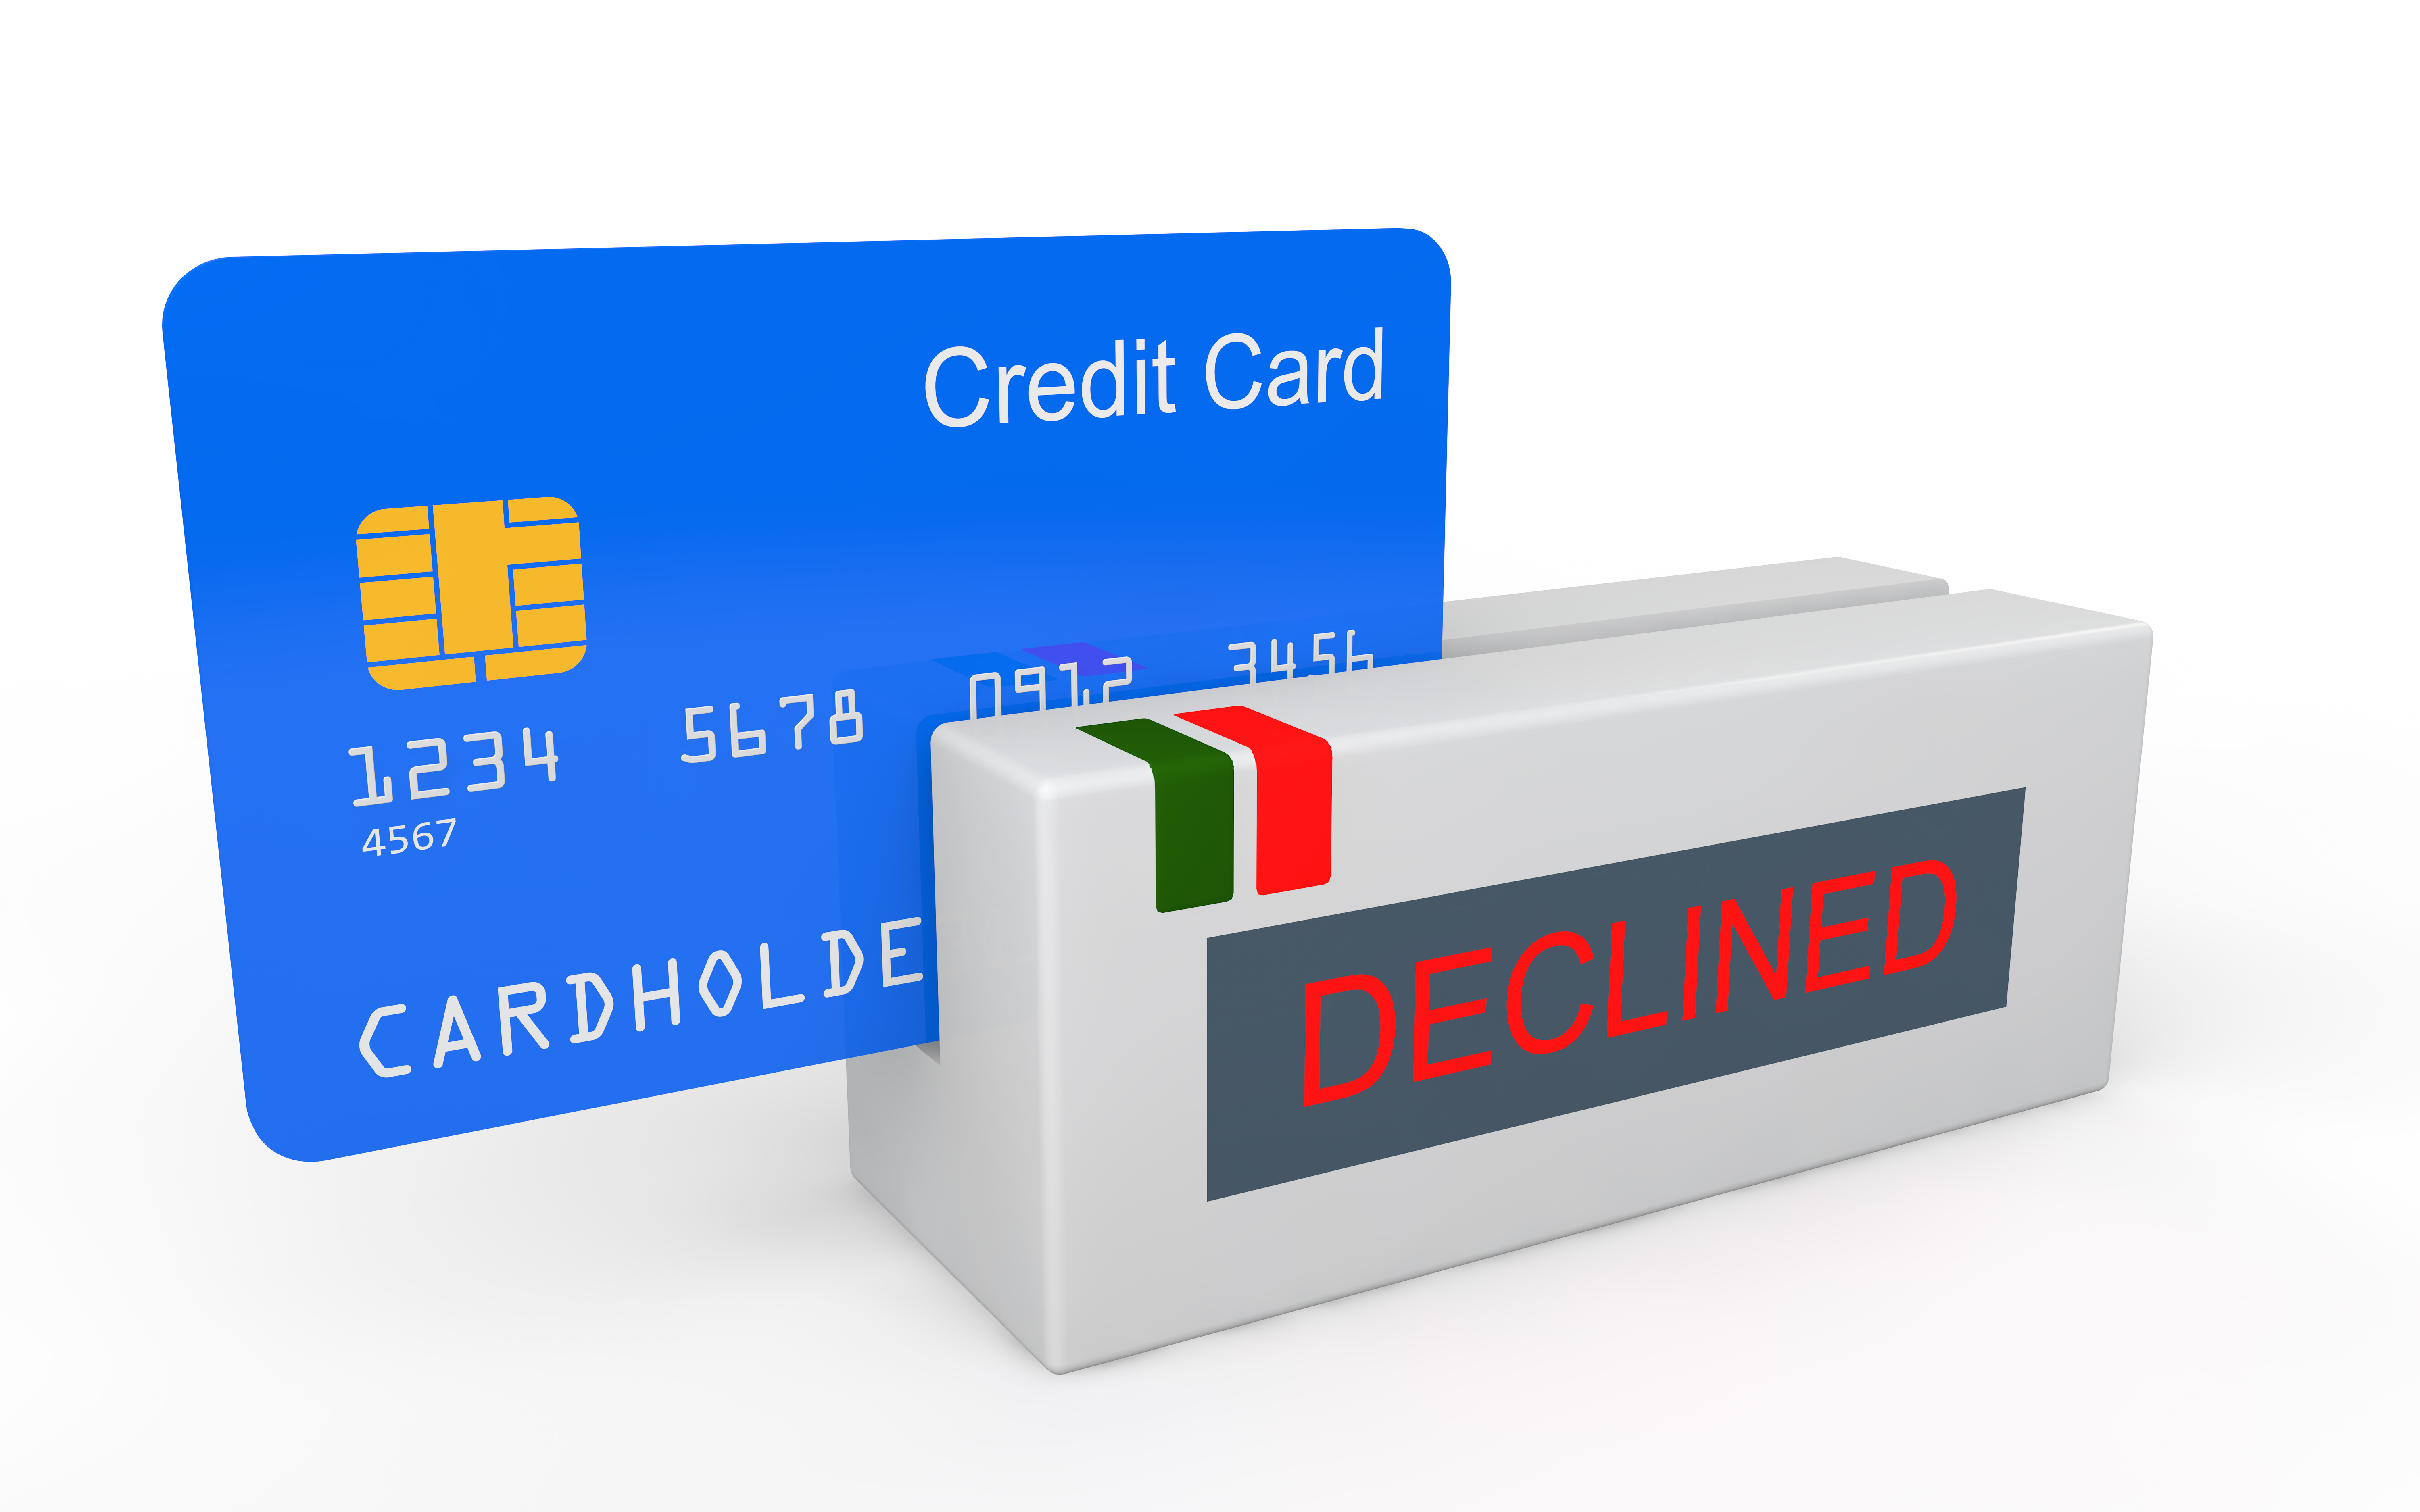 Credit card companies manipulating freeze and limit